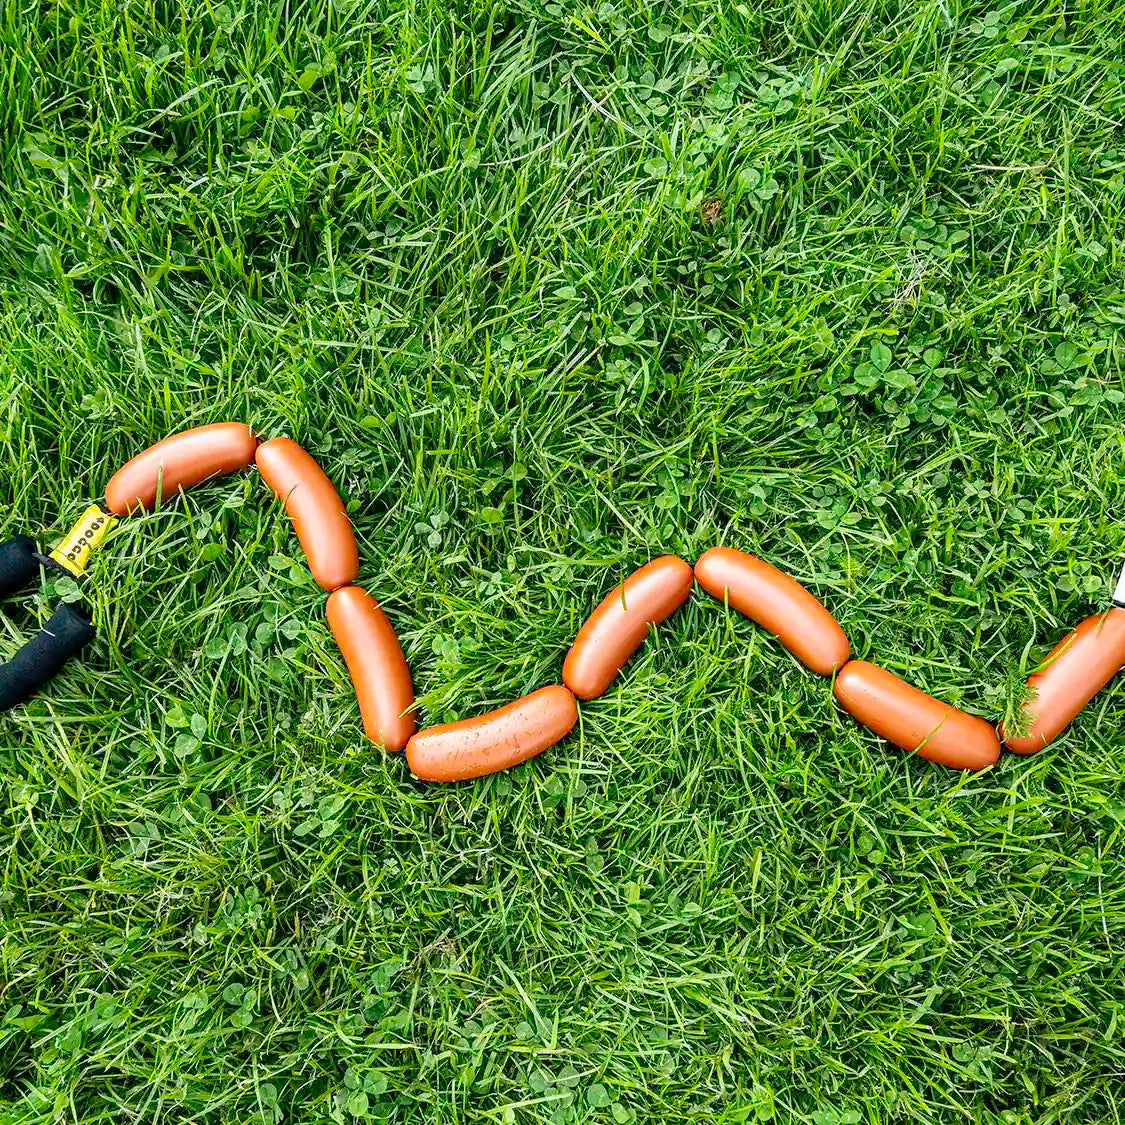 Our hotdog lead is always tangle free.